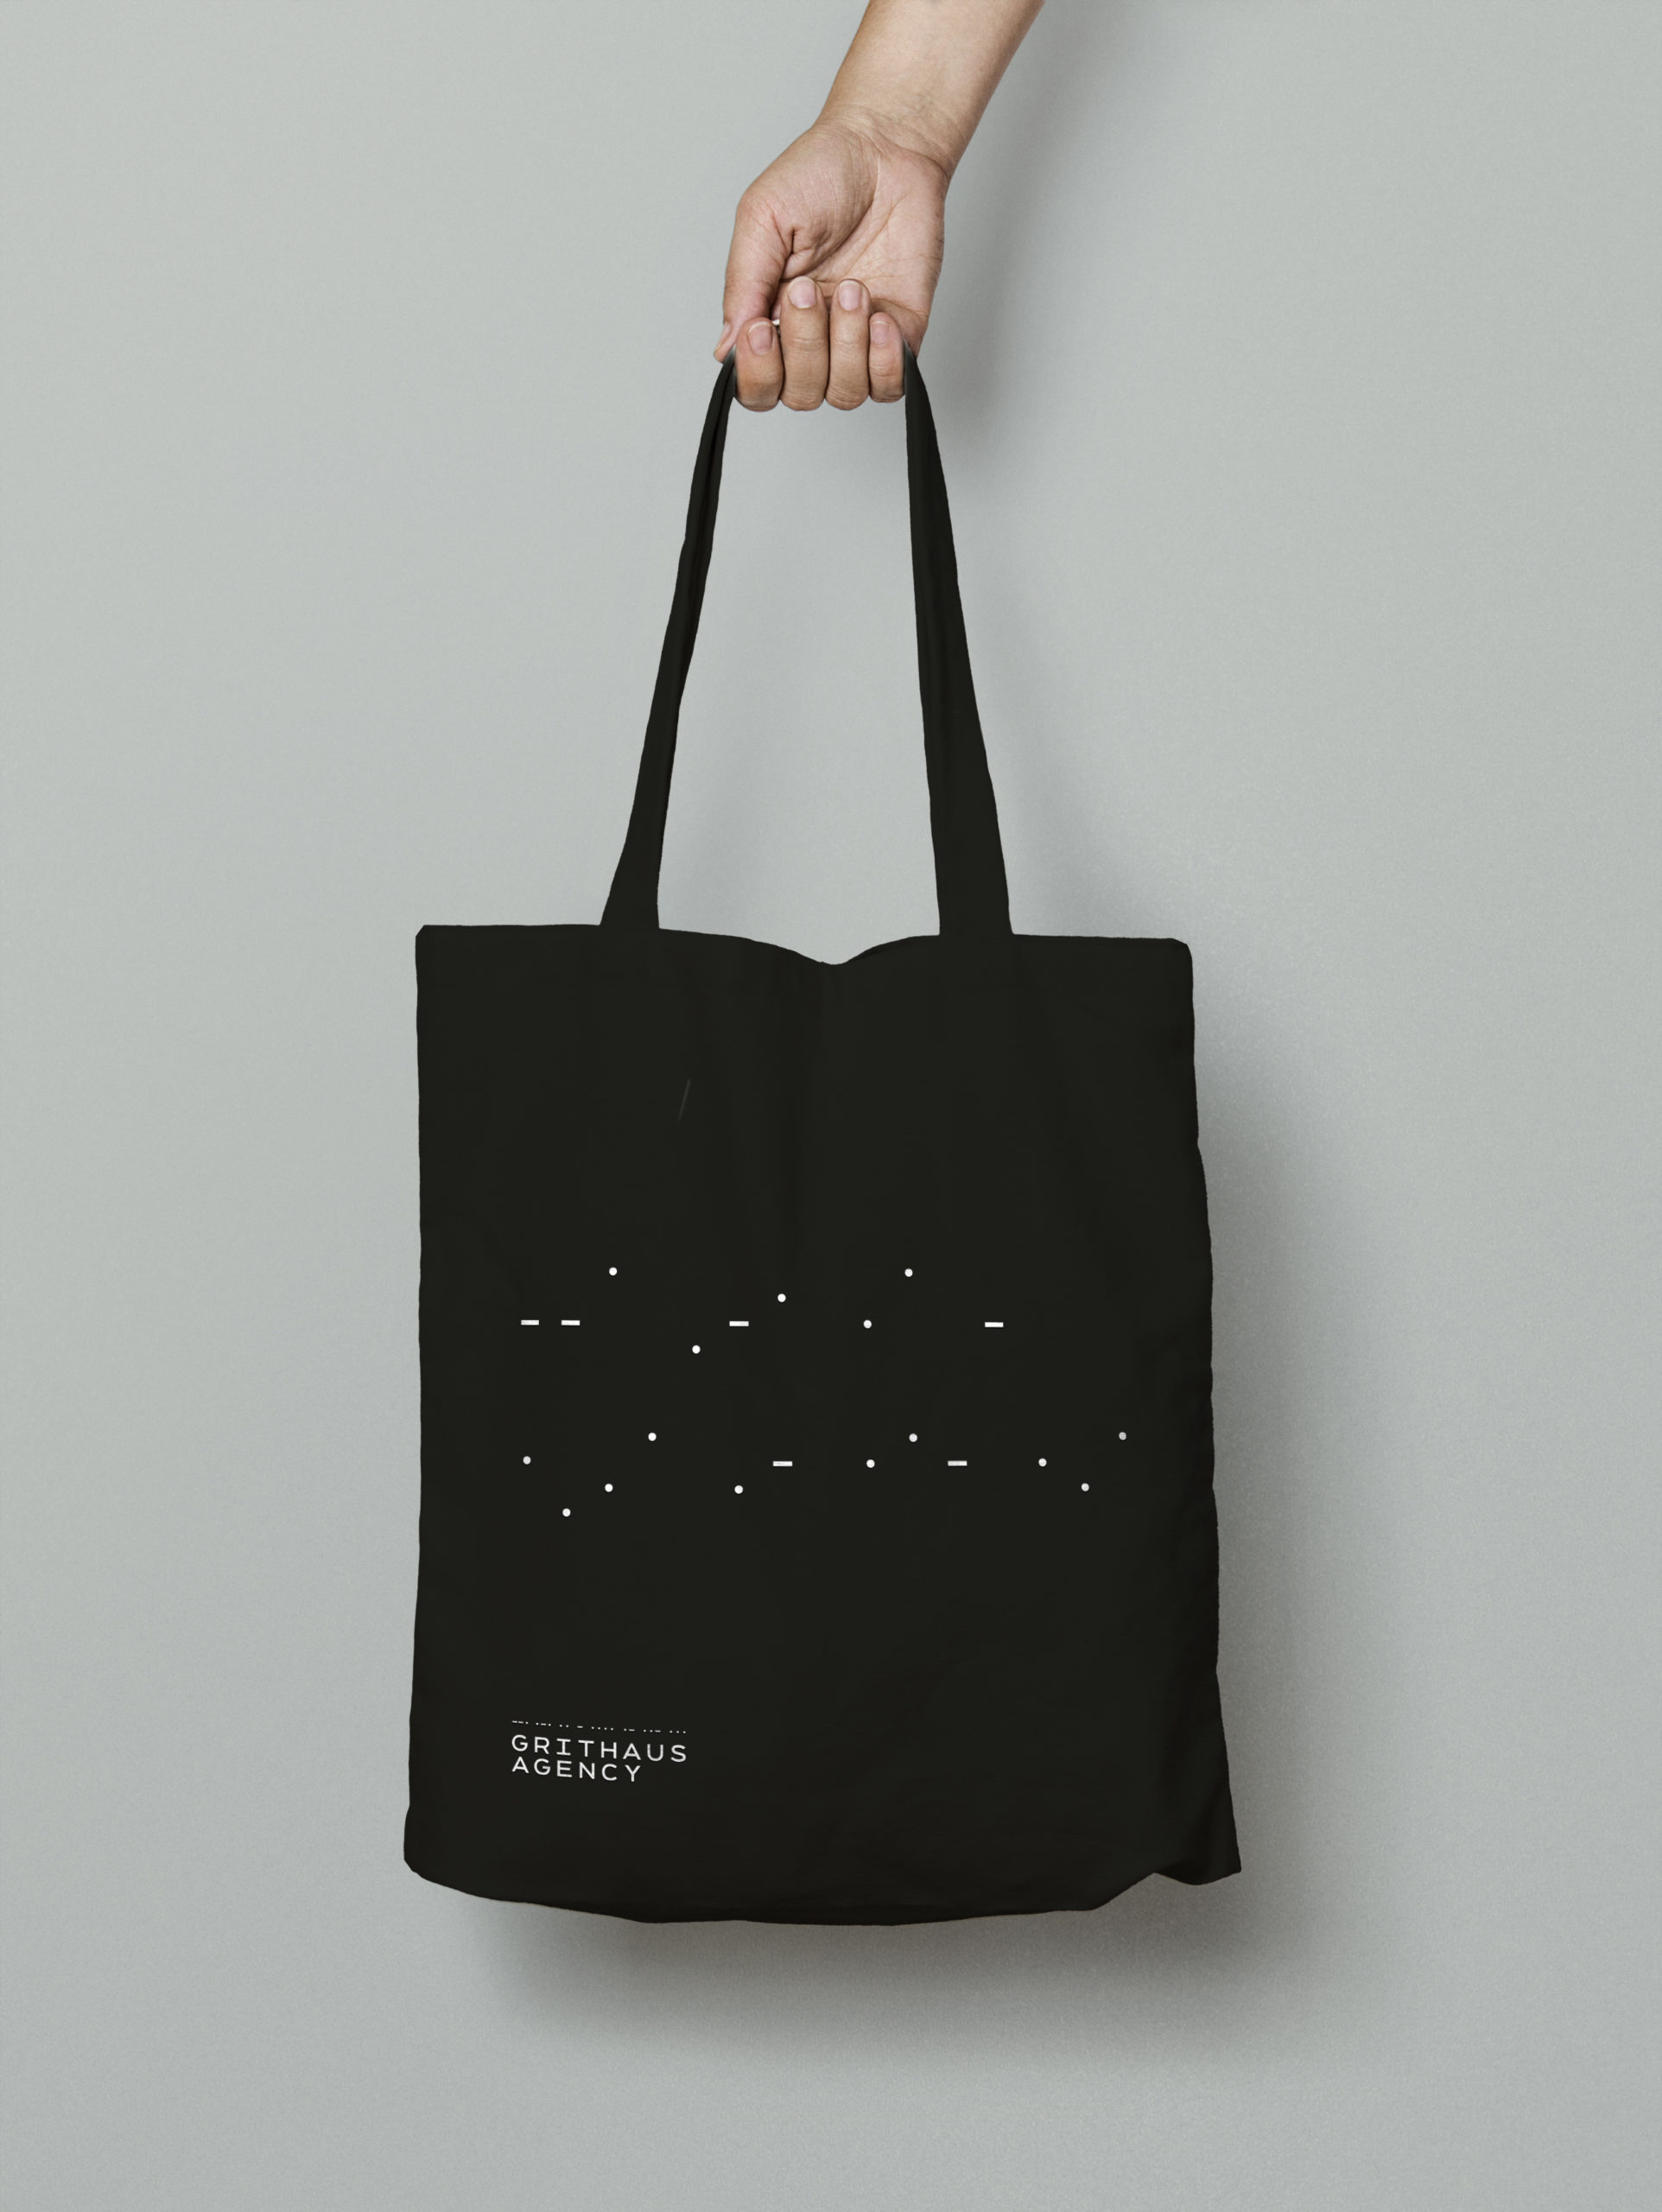 MAAM-Grithaus-Agency-tote-black